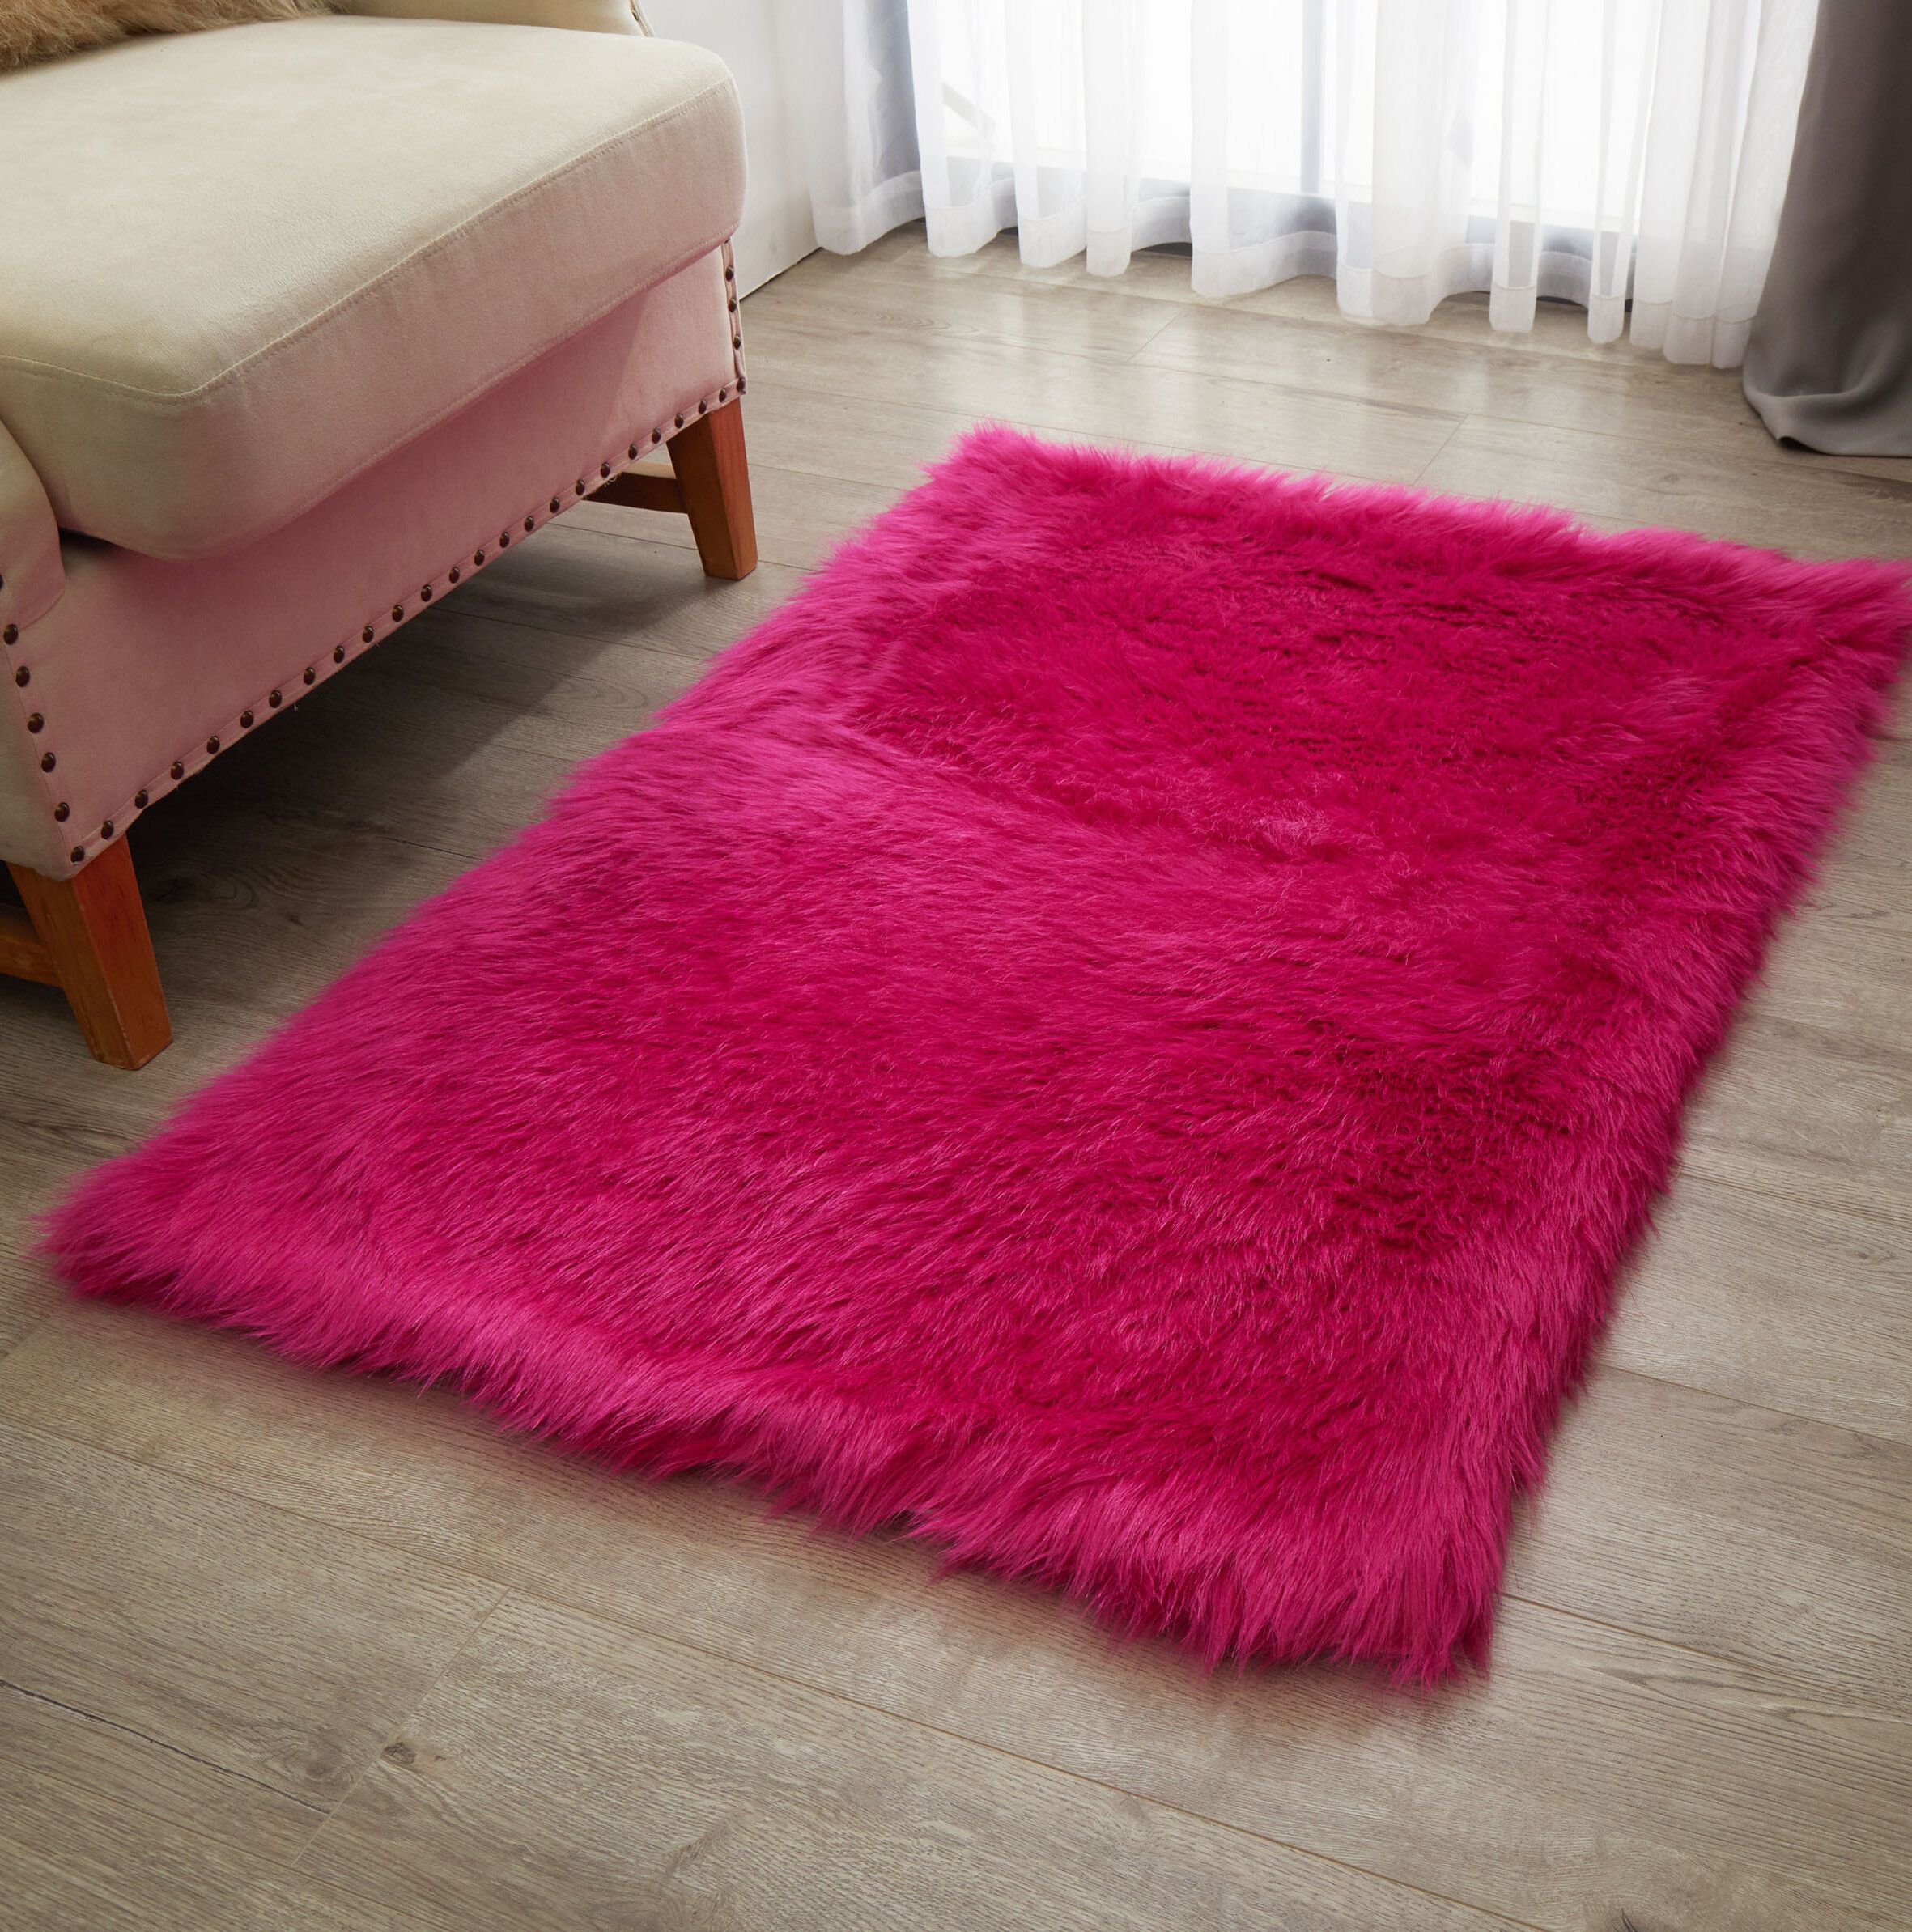 Everly Quinn Thurmont Faux Fur Pink Rug & Reviews | Wayfair For Pink Soft Touch Shag Rugs (View 6 of 15)